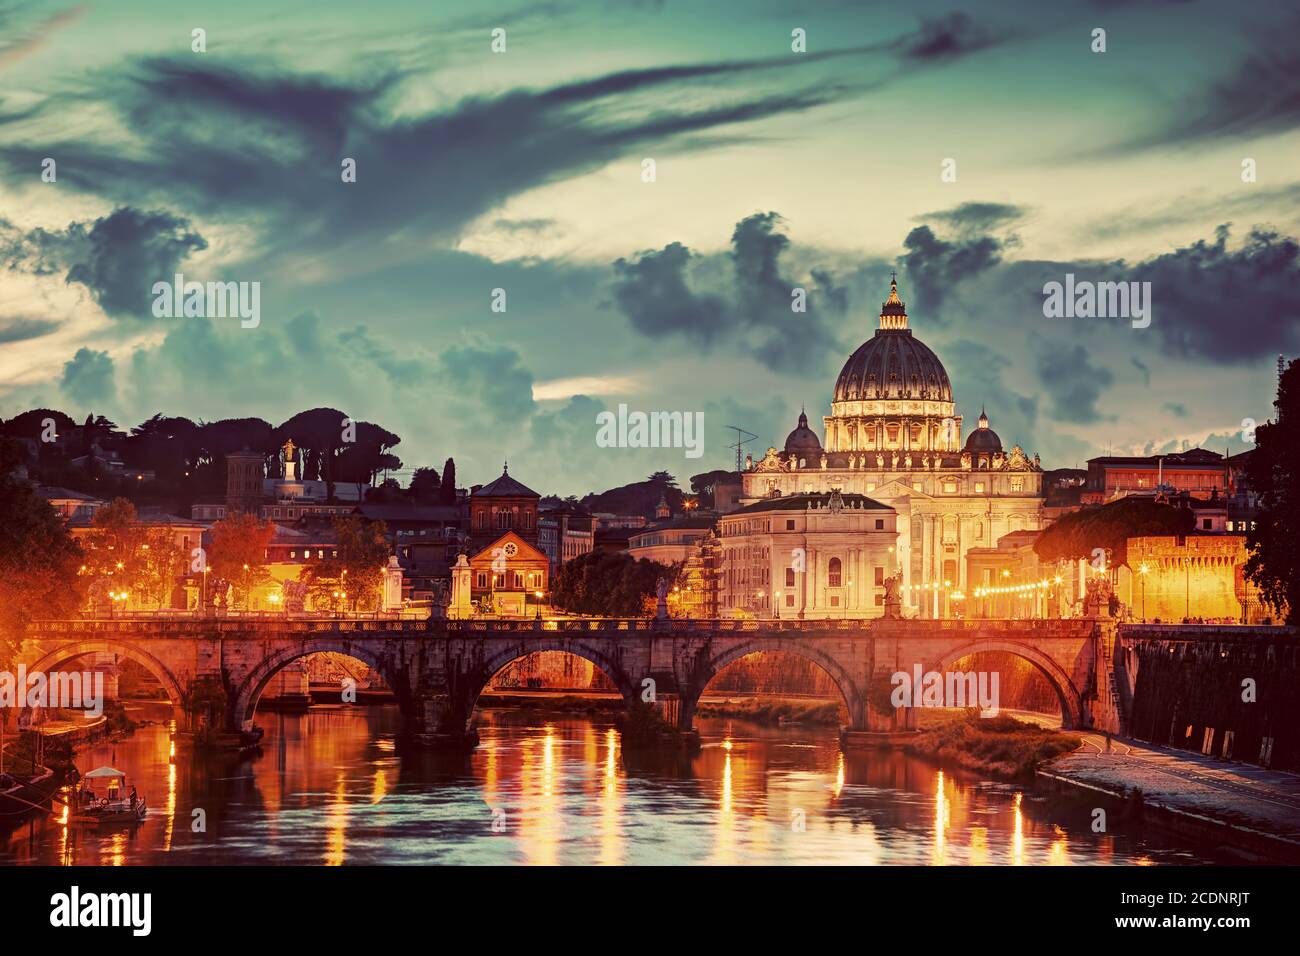 St. Peter#39;s Basilica, Vatican City.  Tiber river in Rome, Italy at late sunset, evening. Stock Photo